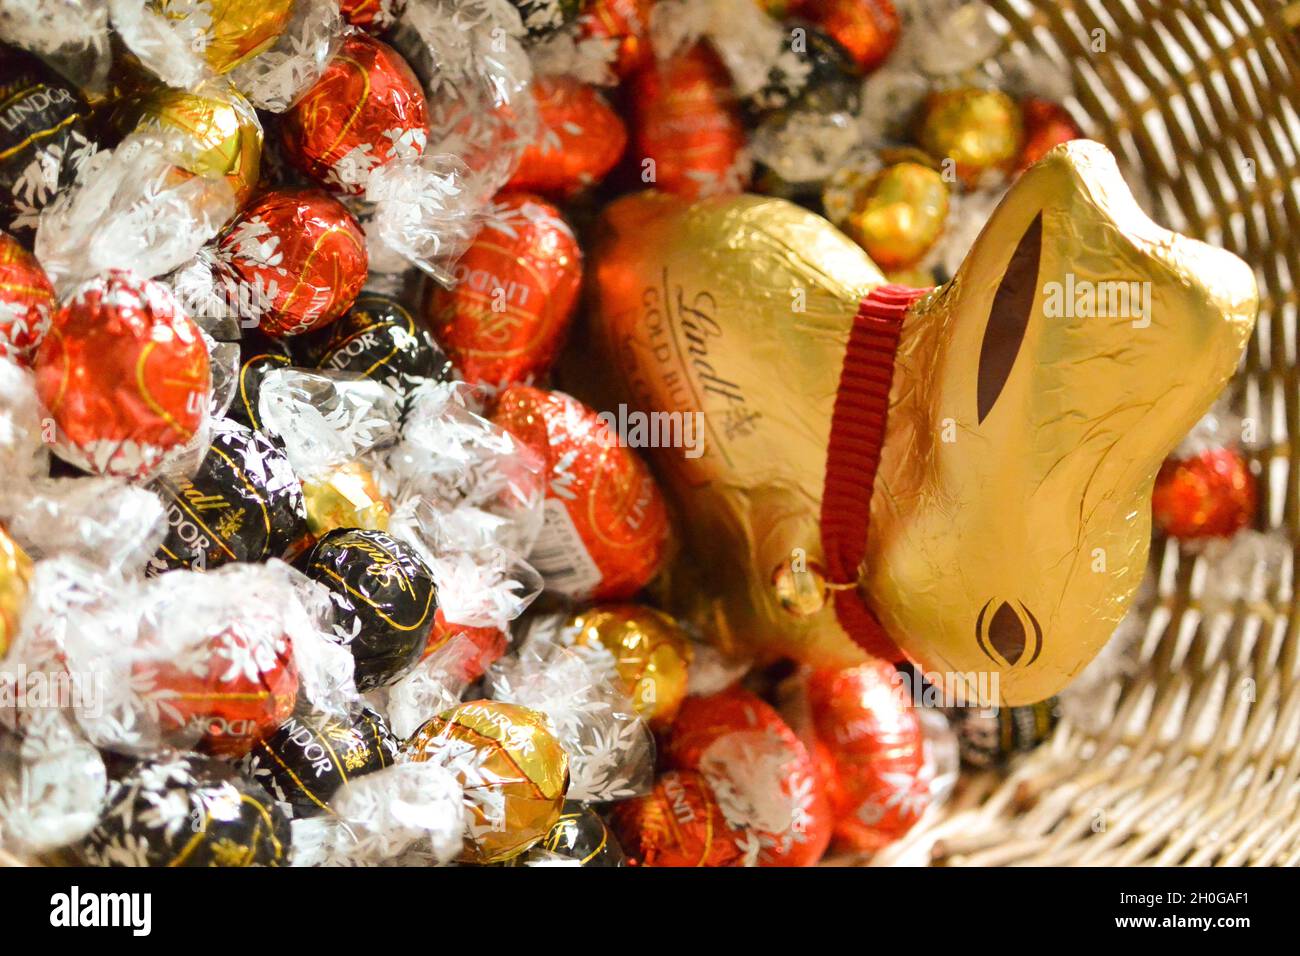 The iconic Lindt Chocolate Bunny wrapped in gold foil with distinctive red collar and bell, in a wicker Easter basket with eggs and Lindor chocolates Stock Photo